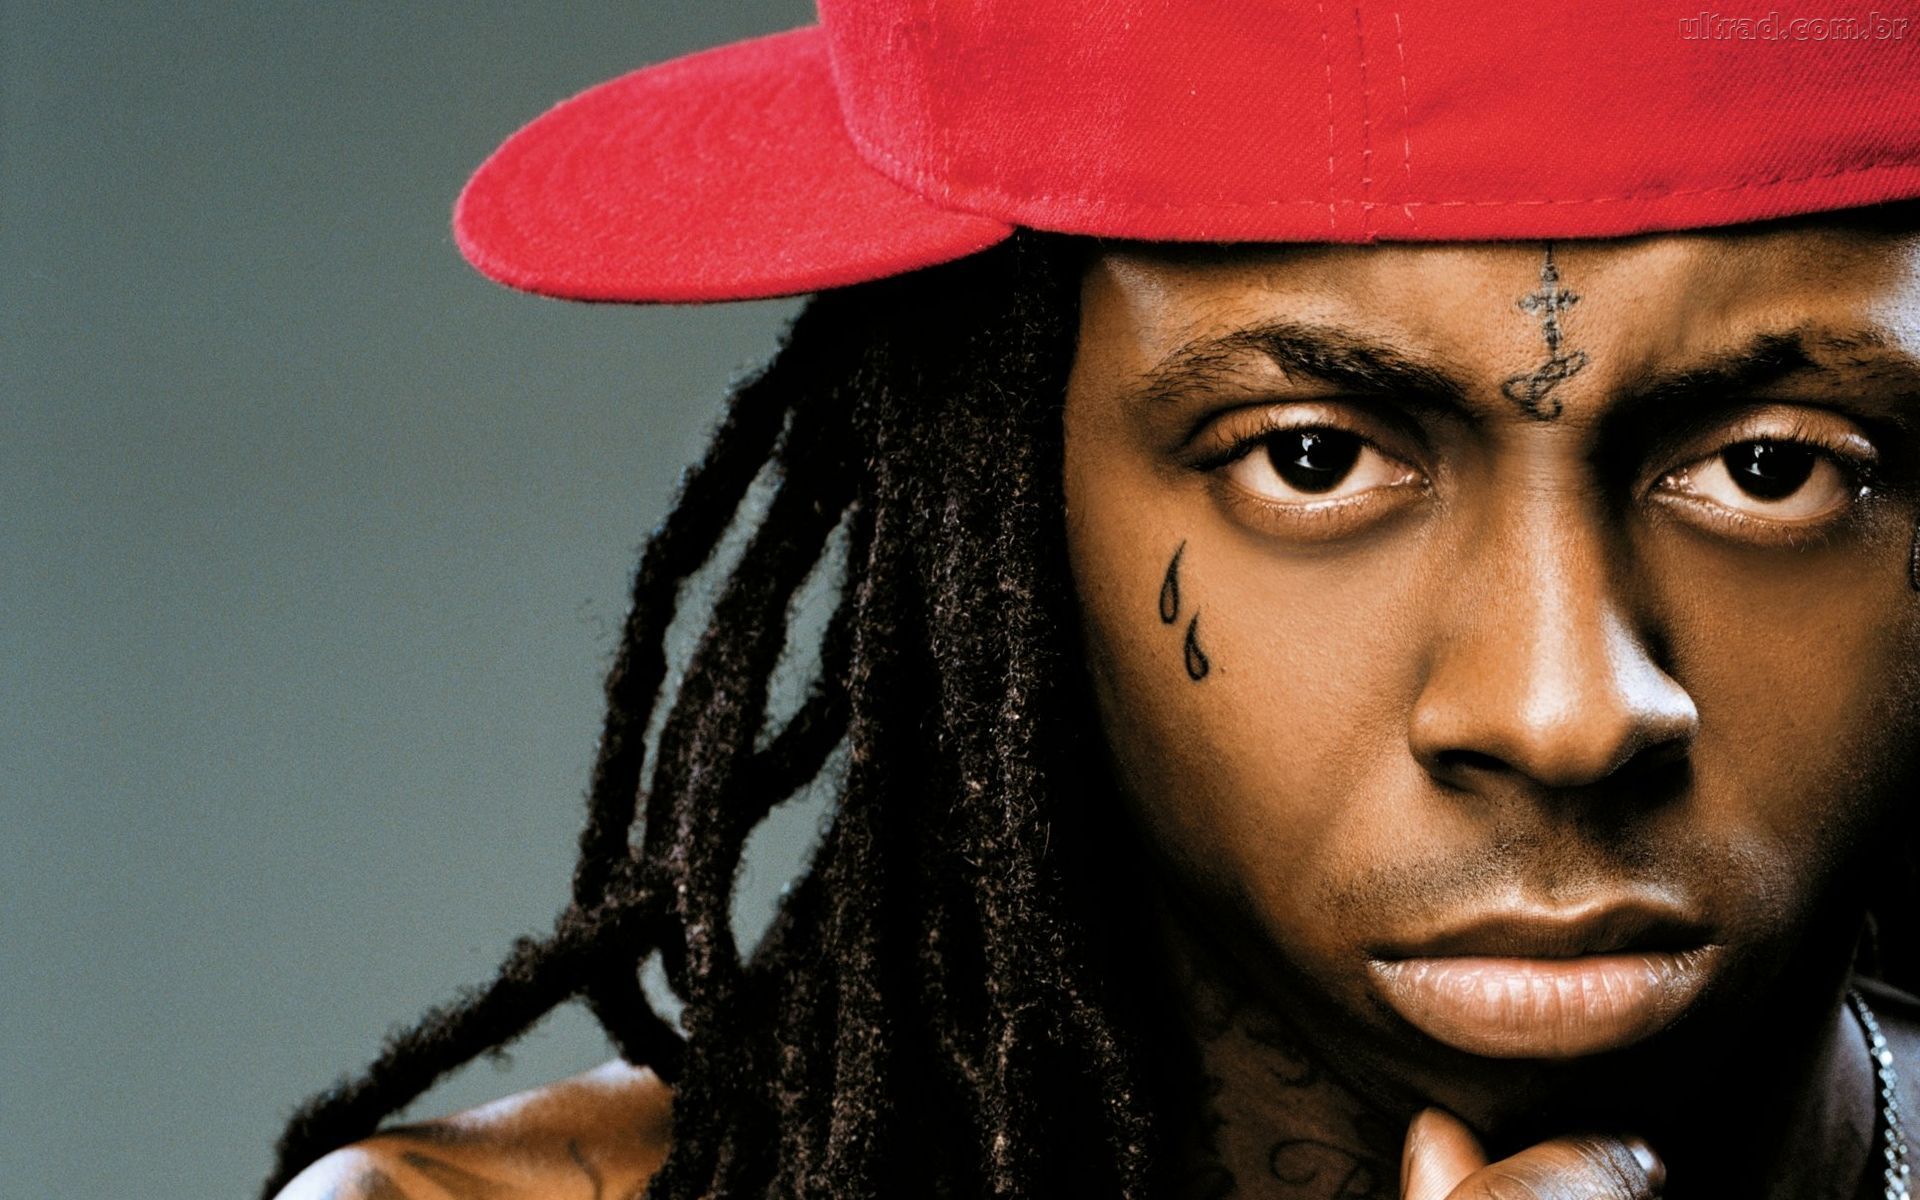 Download Lil Wayne wallpaper for mobile phone, free Lil Wayne HD picture